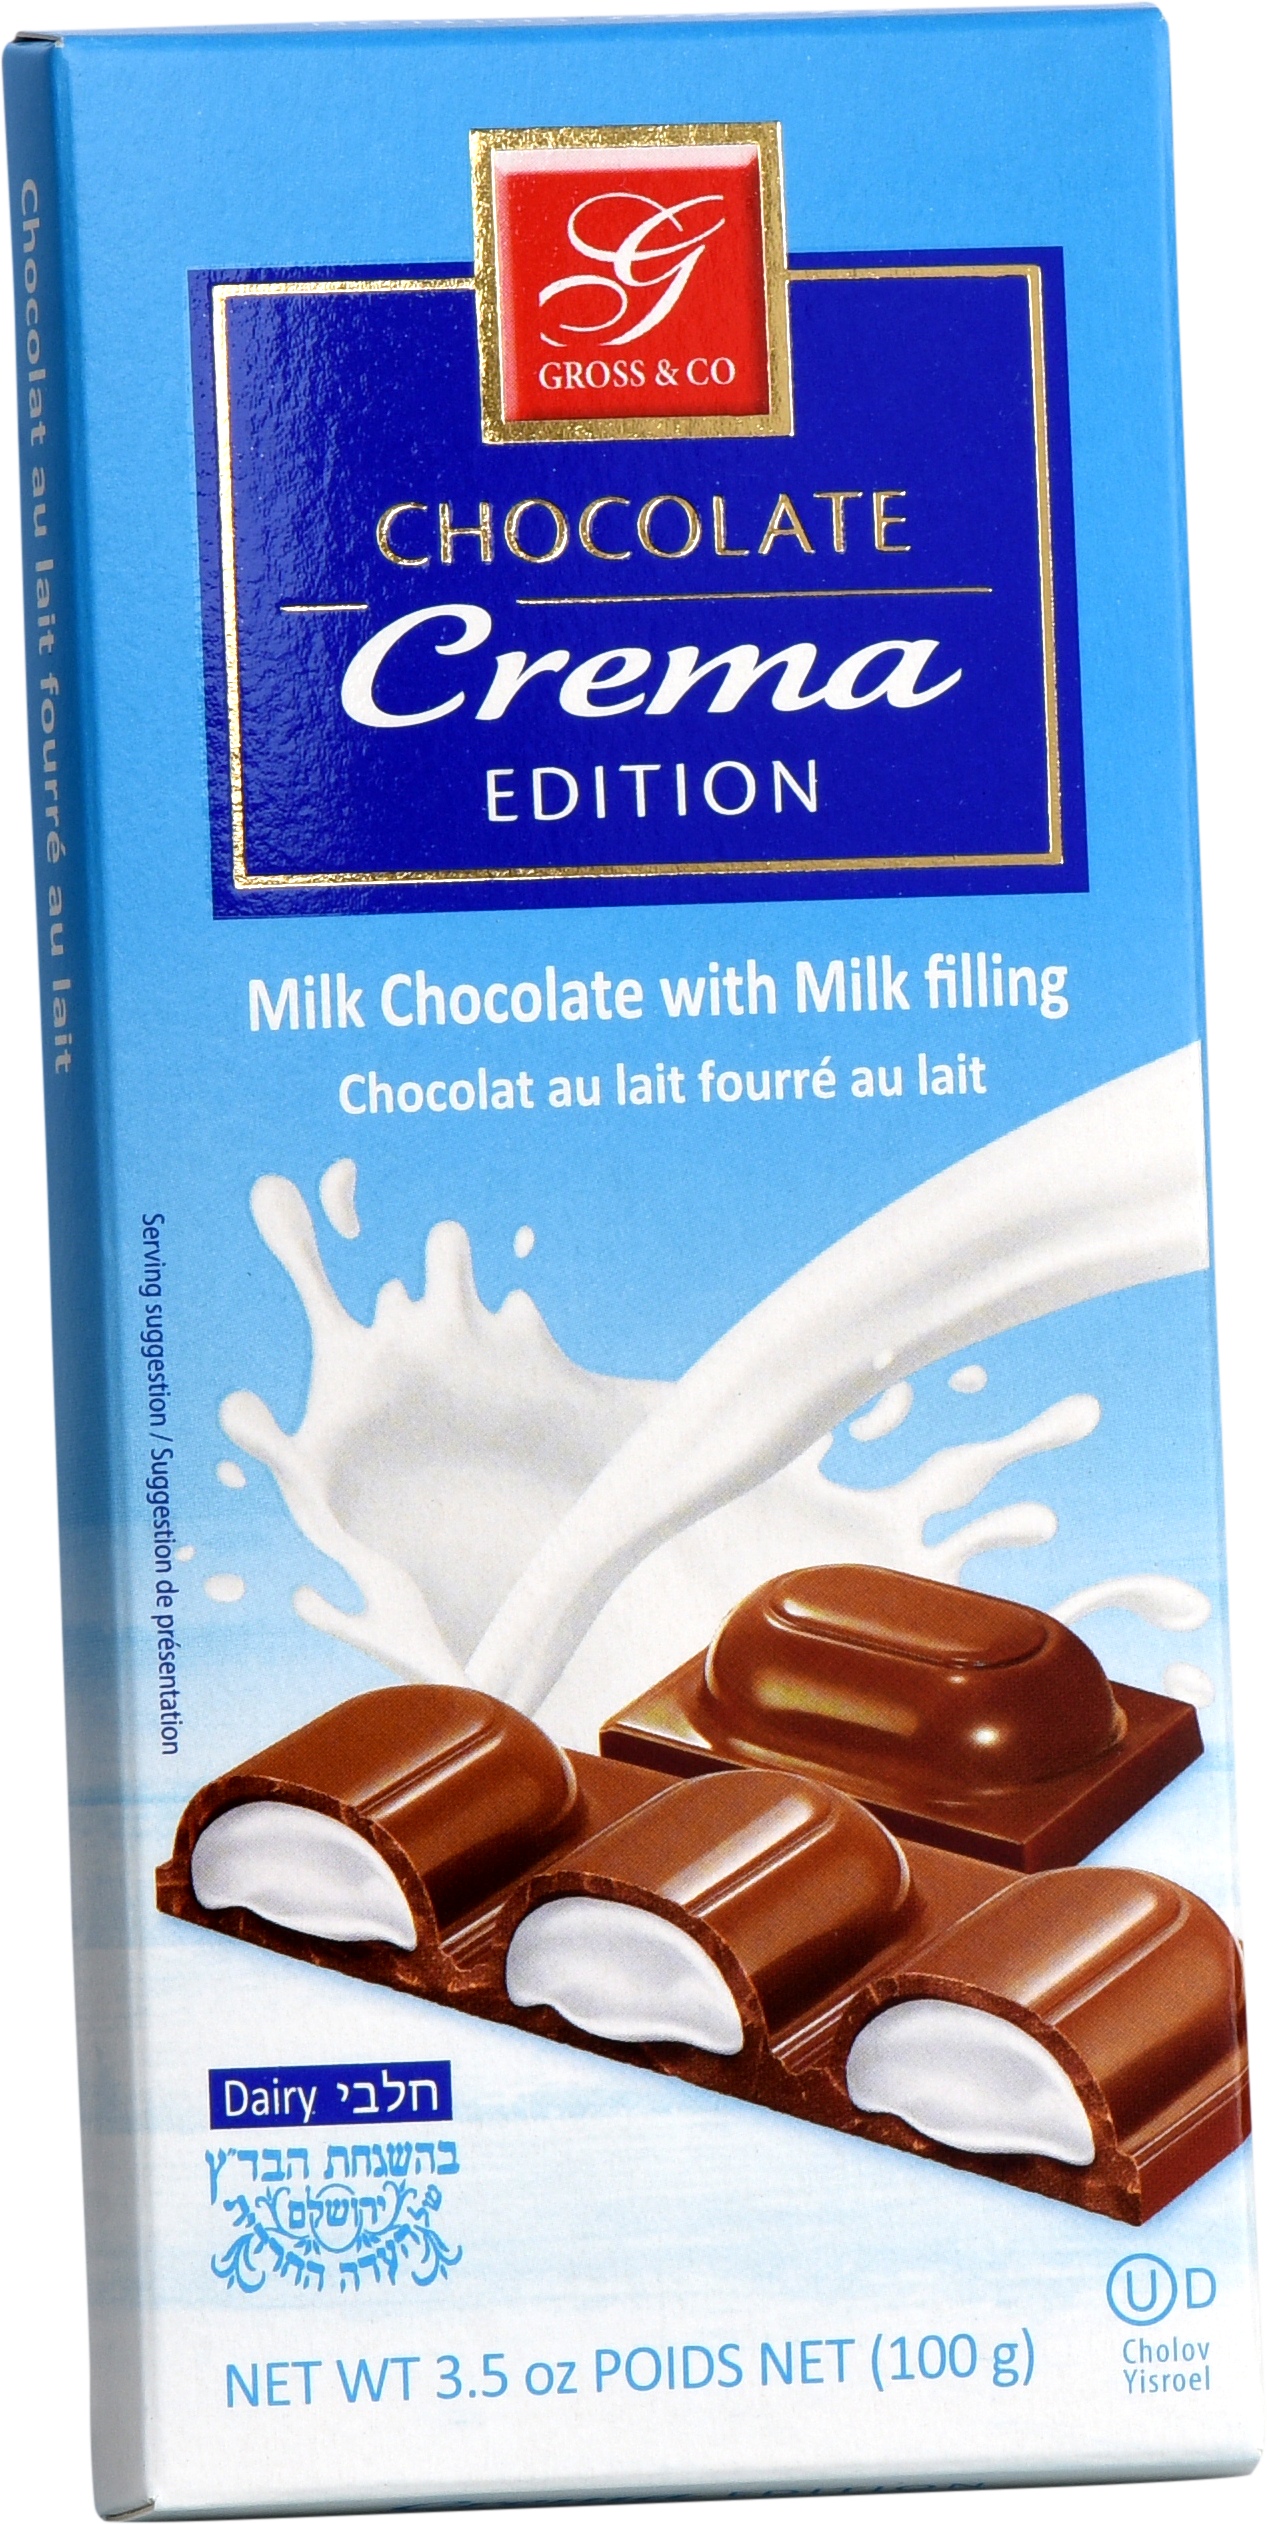 MILK CHOCOLATE WITH MILK FILLING – Shufra